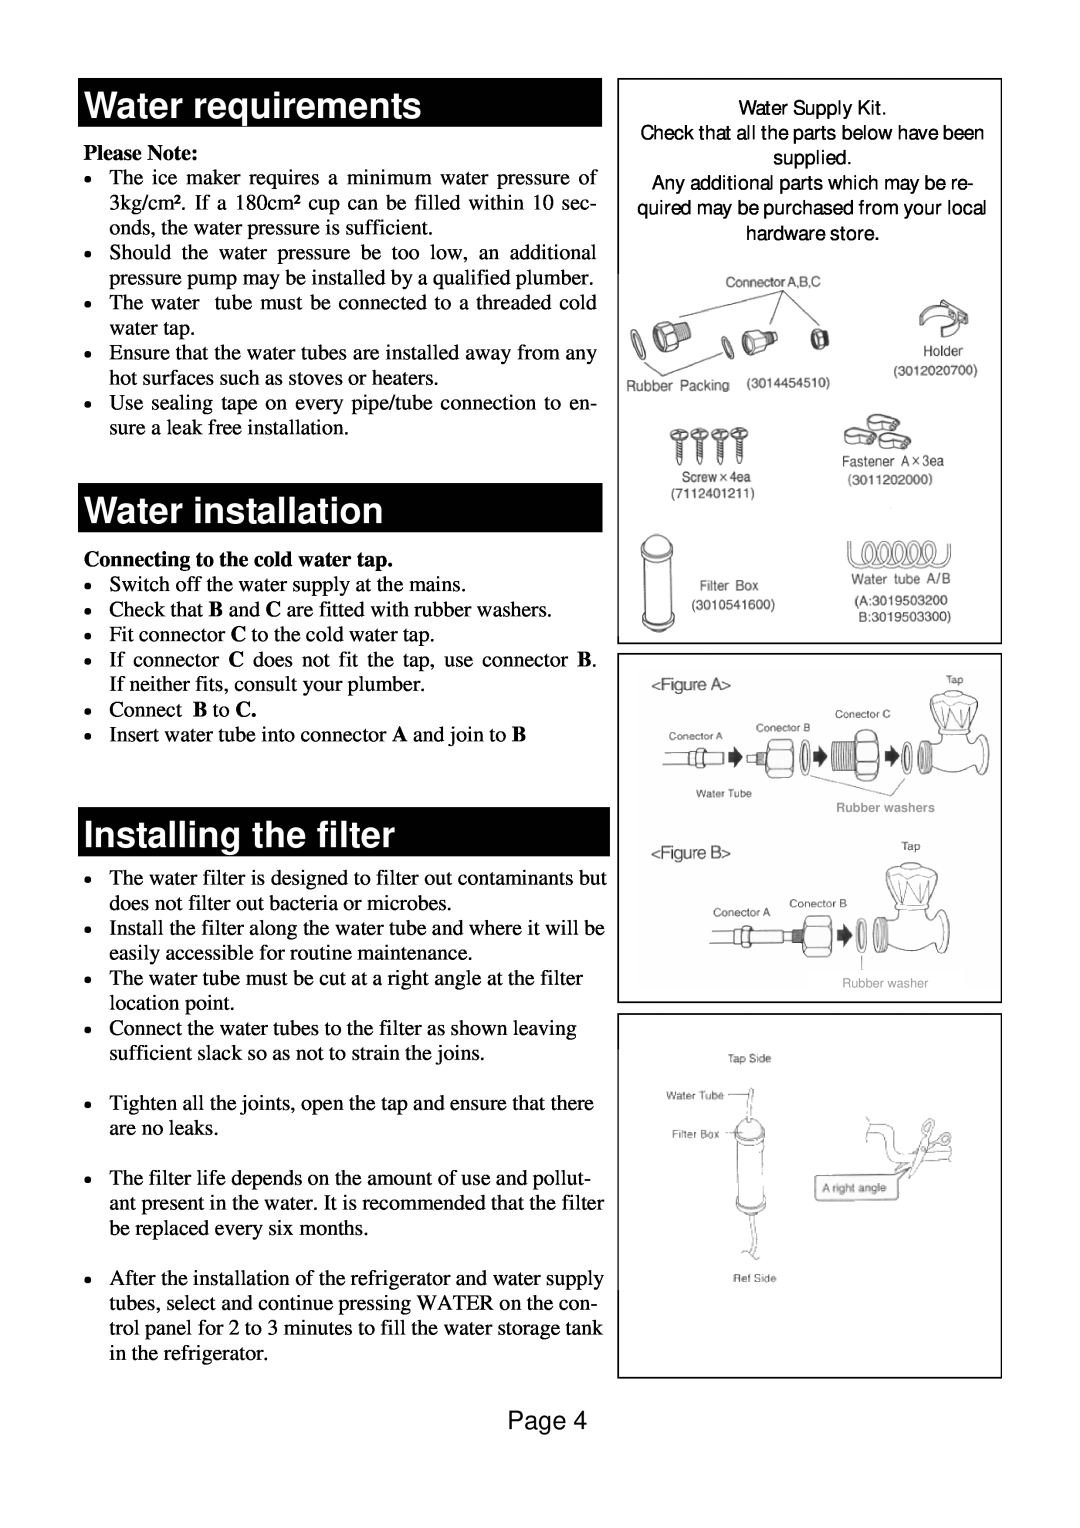 Defy Appliances F 600 LM owner manual Water requirements, Water installation, Installing the filter, Water Supply Kit 